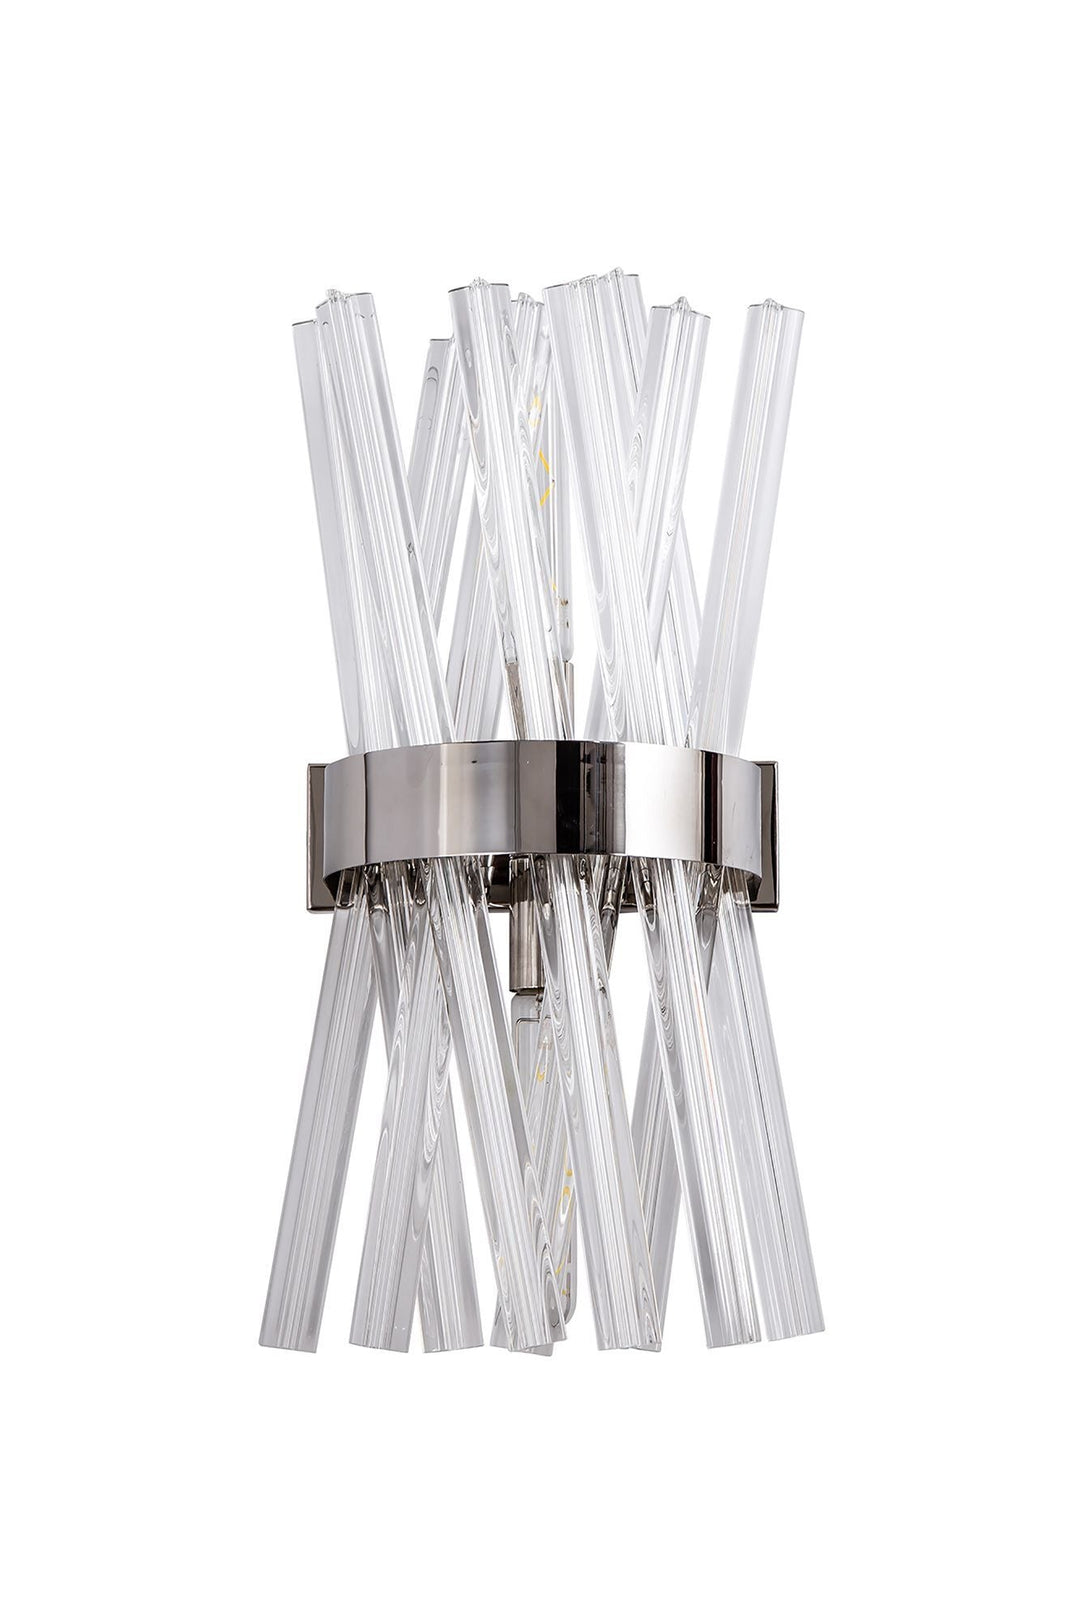 Nelson Lighting NL83599 | Clover 2-Light Wall Sconce | Polished Nickel and Clear Glass